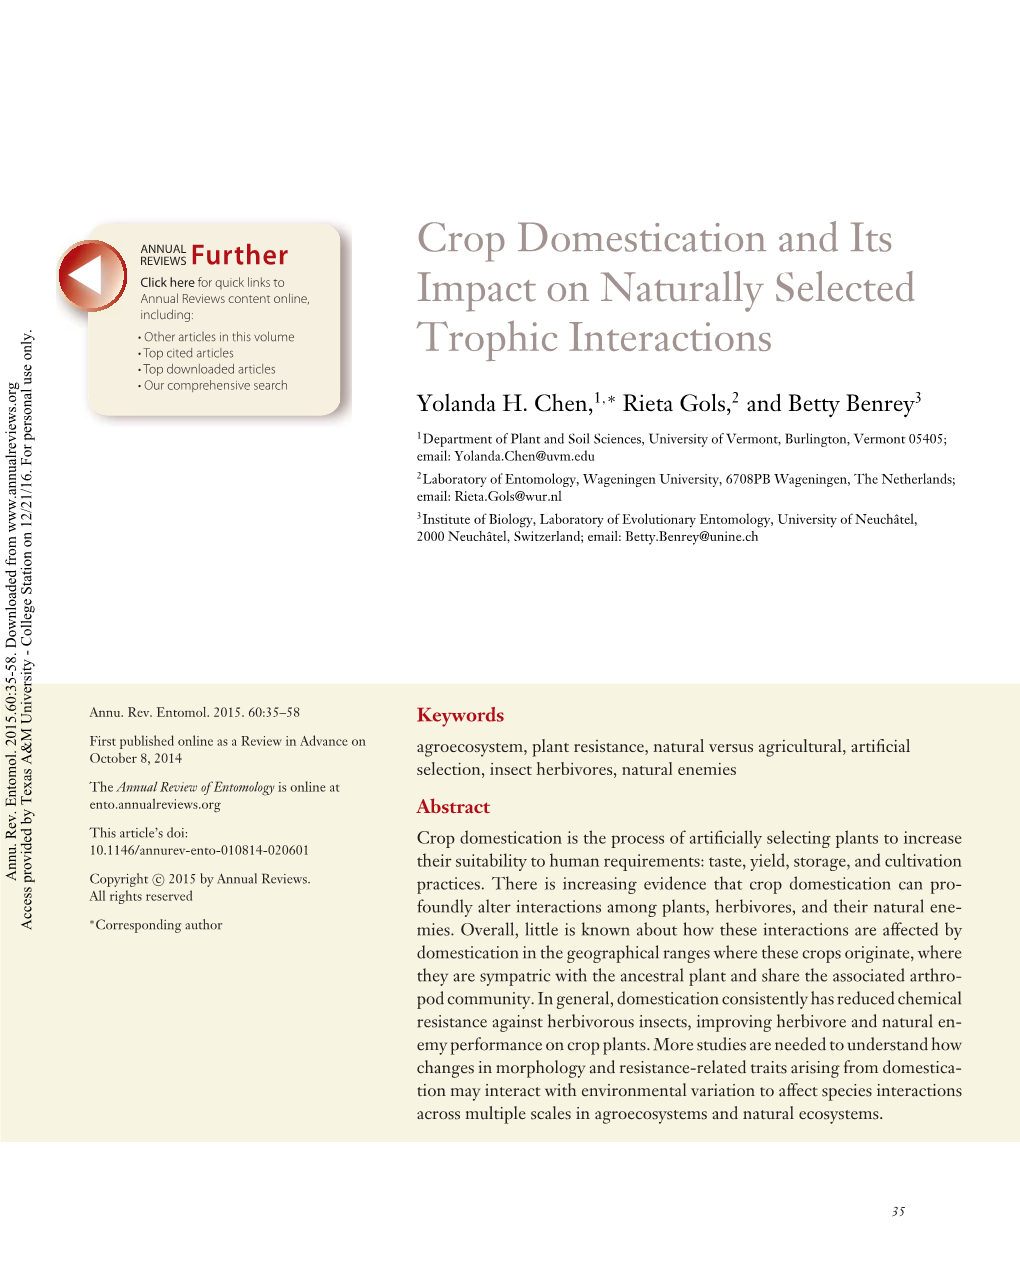 Crop Domestication and Its Impact on Naturally Selected Trophic Interactions